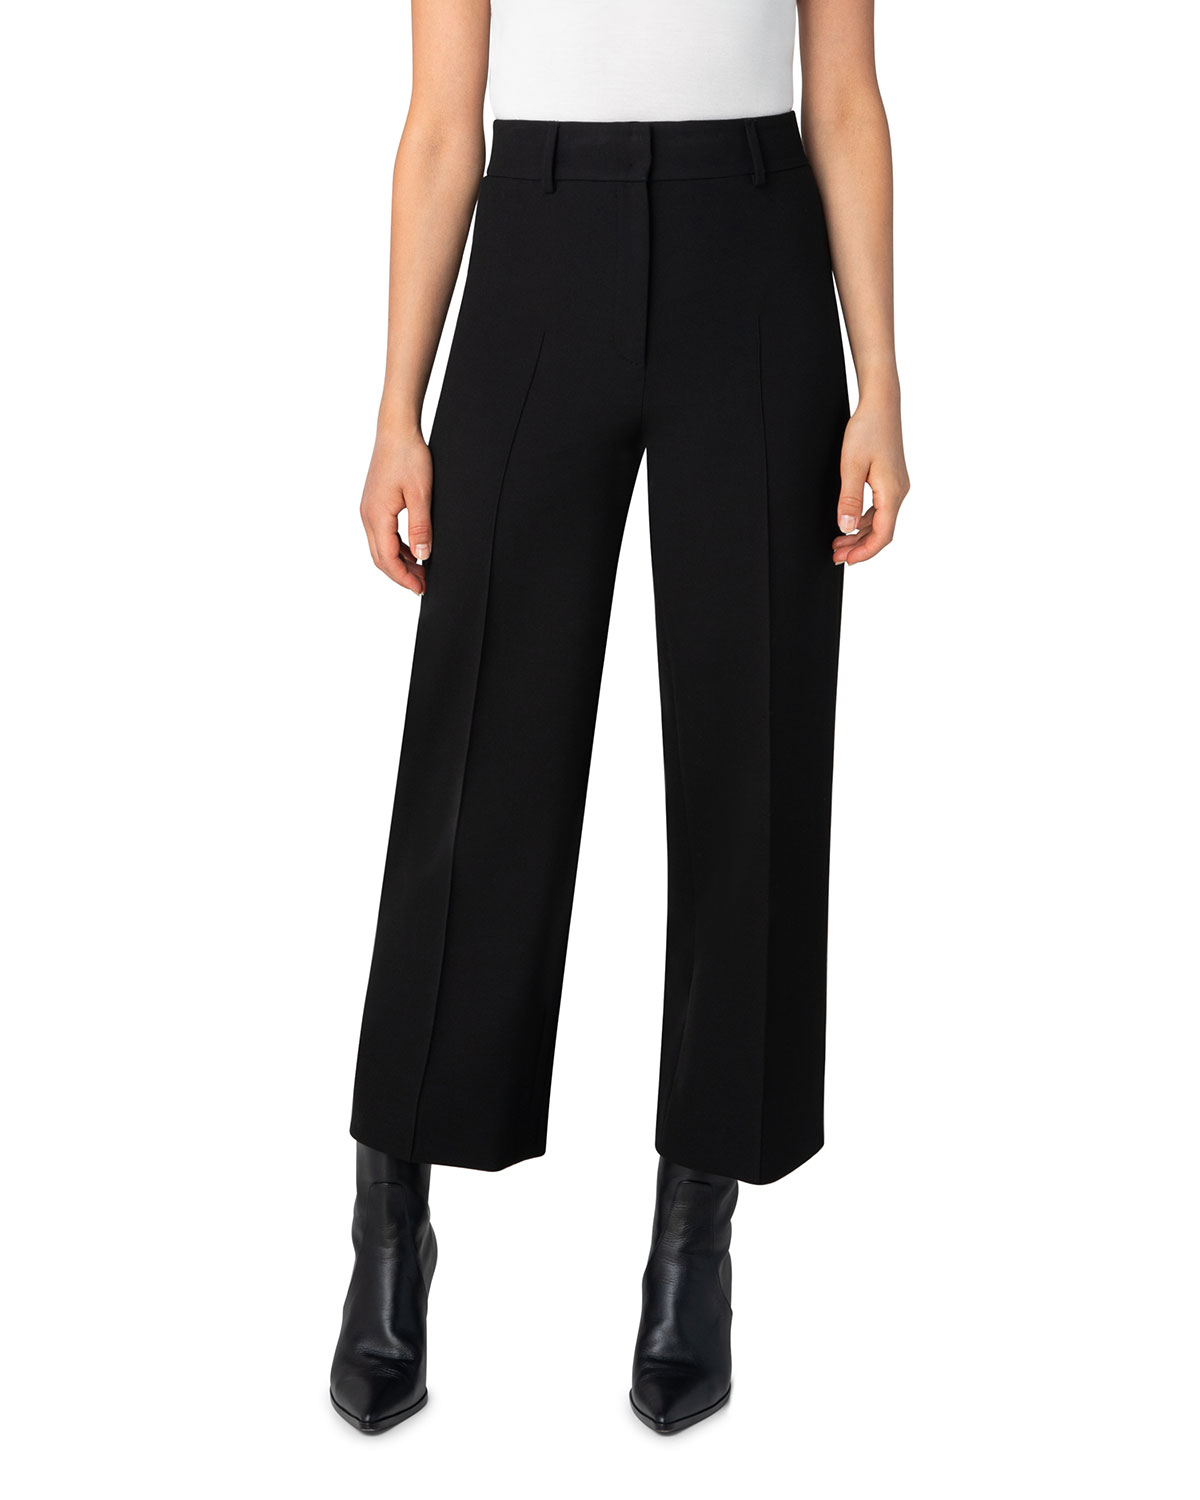 AKRIS PUNTO CROPPED WIDE-LEG STRETCH CREPE PANTS WITH PIPING,PROD230650019